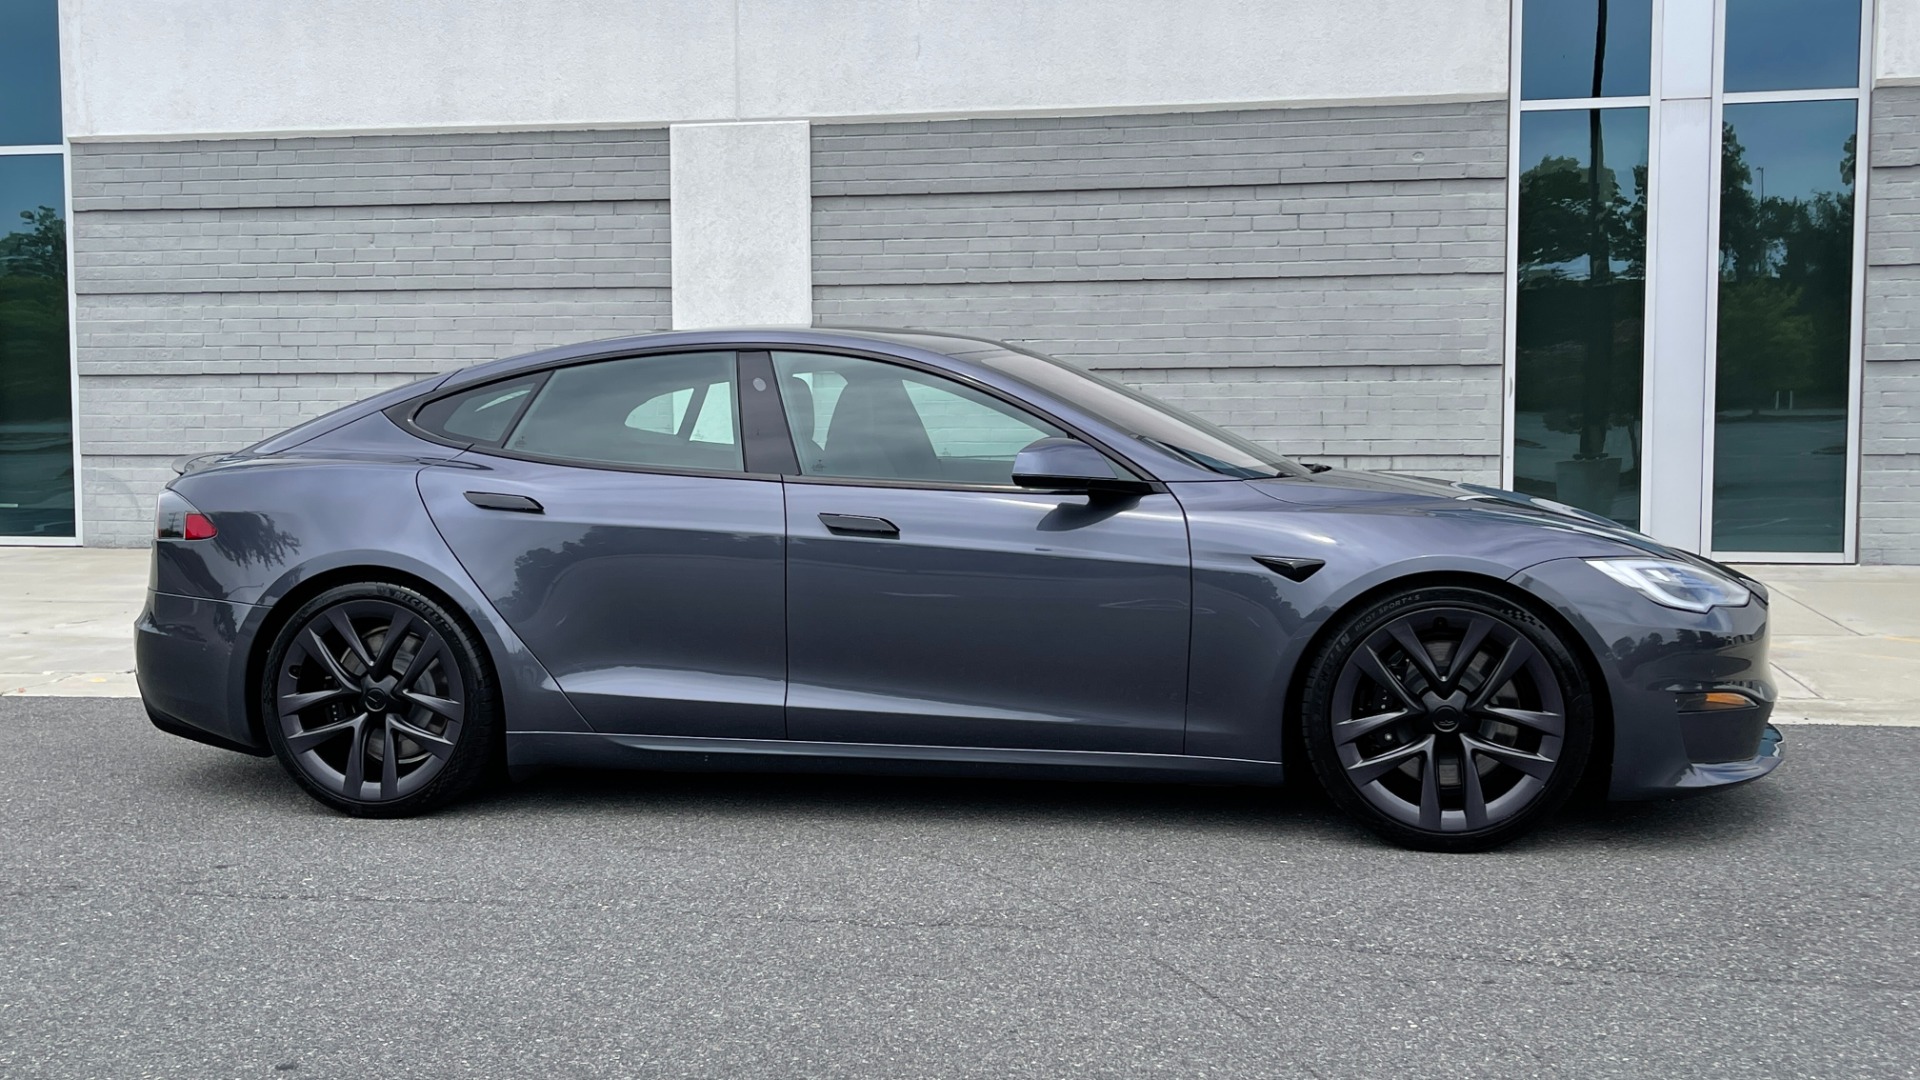 Used 2021 Tesla Model S Plaid / FULL SELF DRIVING / 21IN WHEELS / CARBON FIBER TRIM / PREMIUM CONNE for sale $134,000 at Formula Imports in Charlotte NC 28227 8